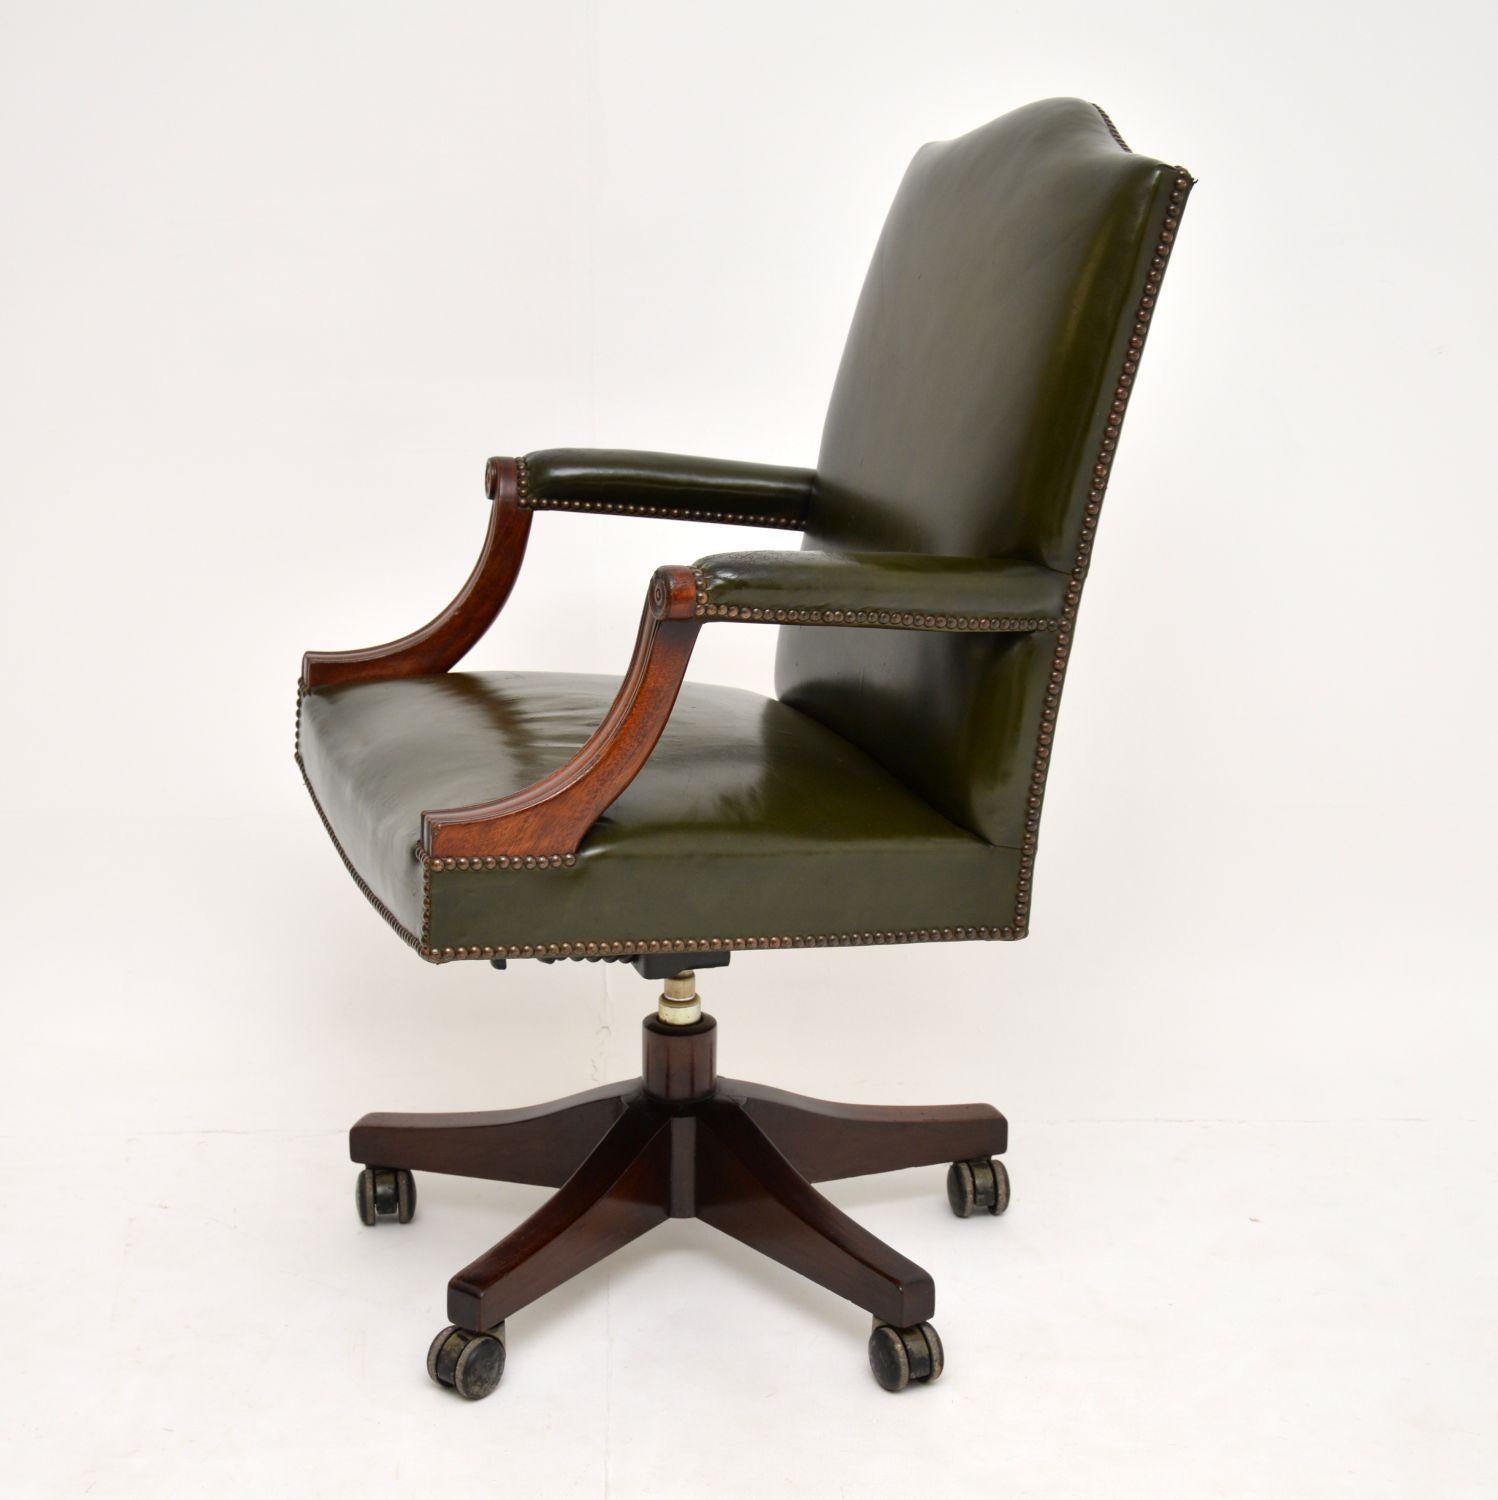 British Antique Georgian Style Leather and Mahogany Swivel Desk Chair